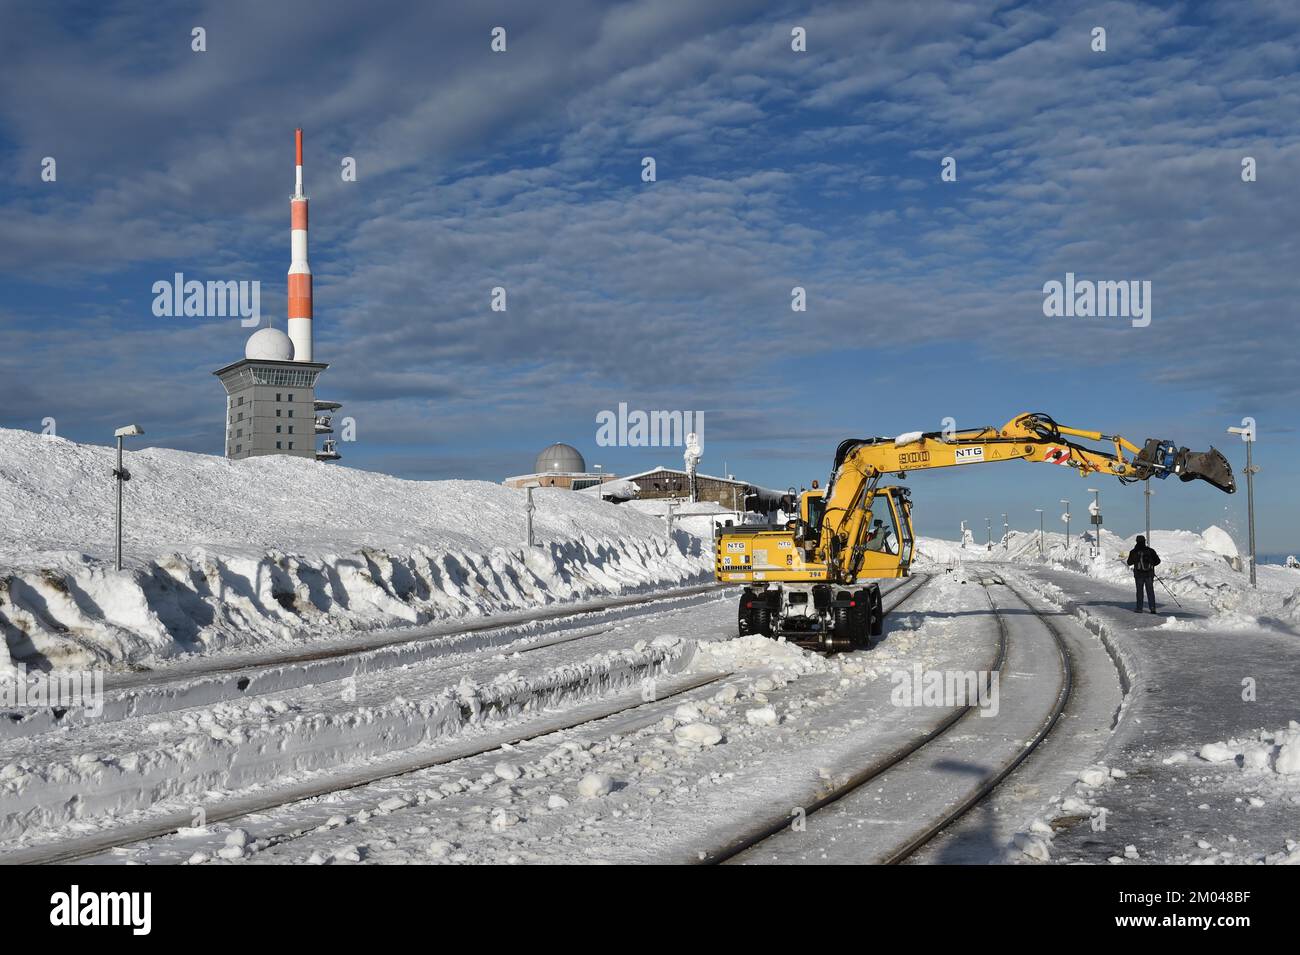 Two-way excavator clears the tracks of snow at Brocken railway station in the Harz mountains, Saxony-Anhalt, Germany, Europe Stock Photo